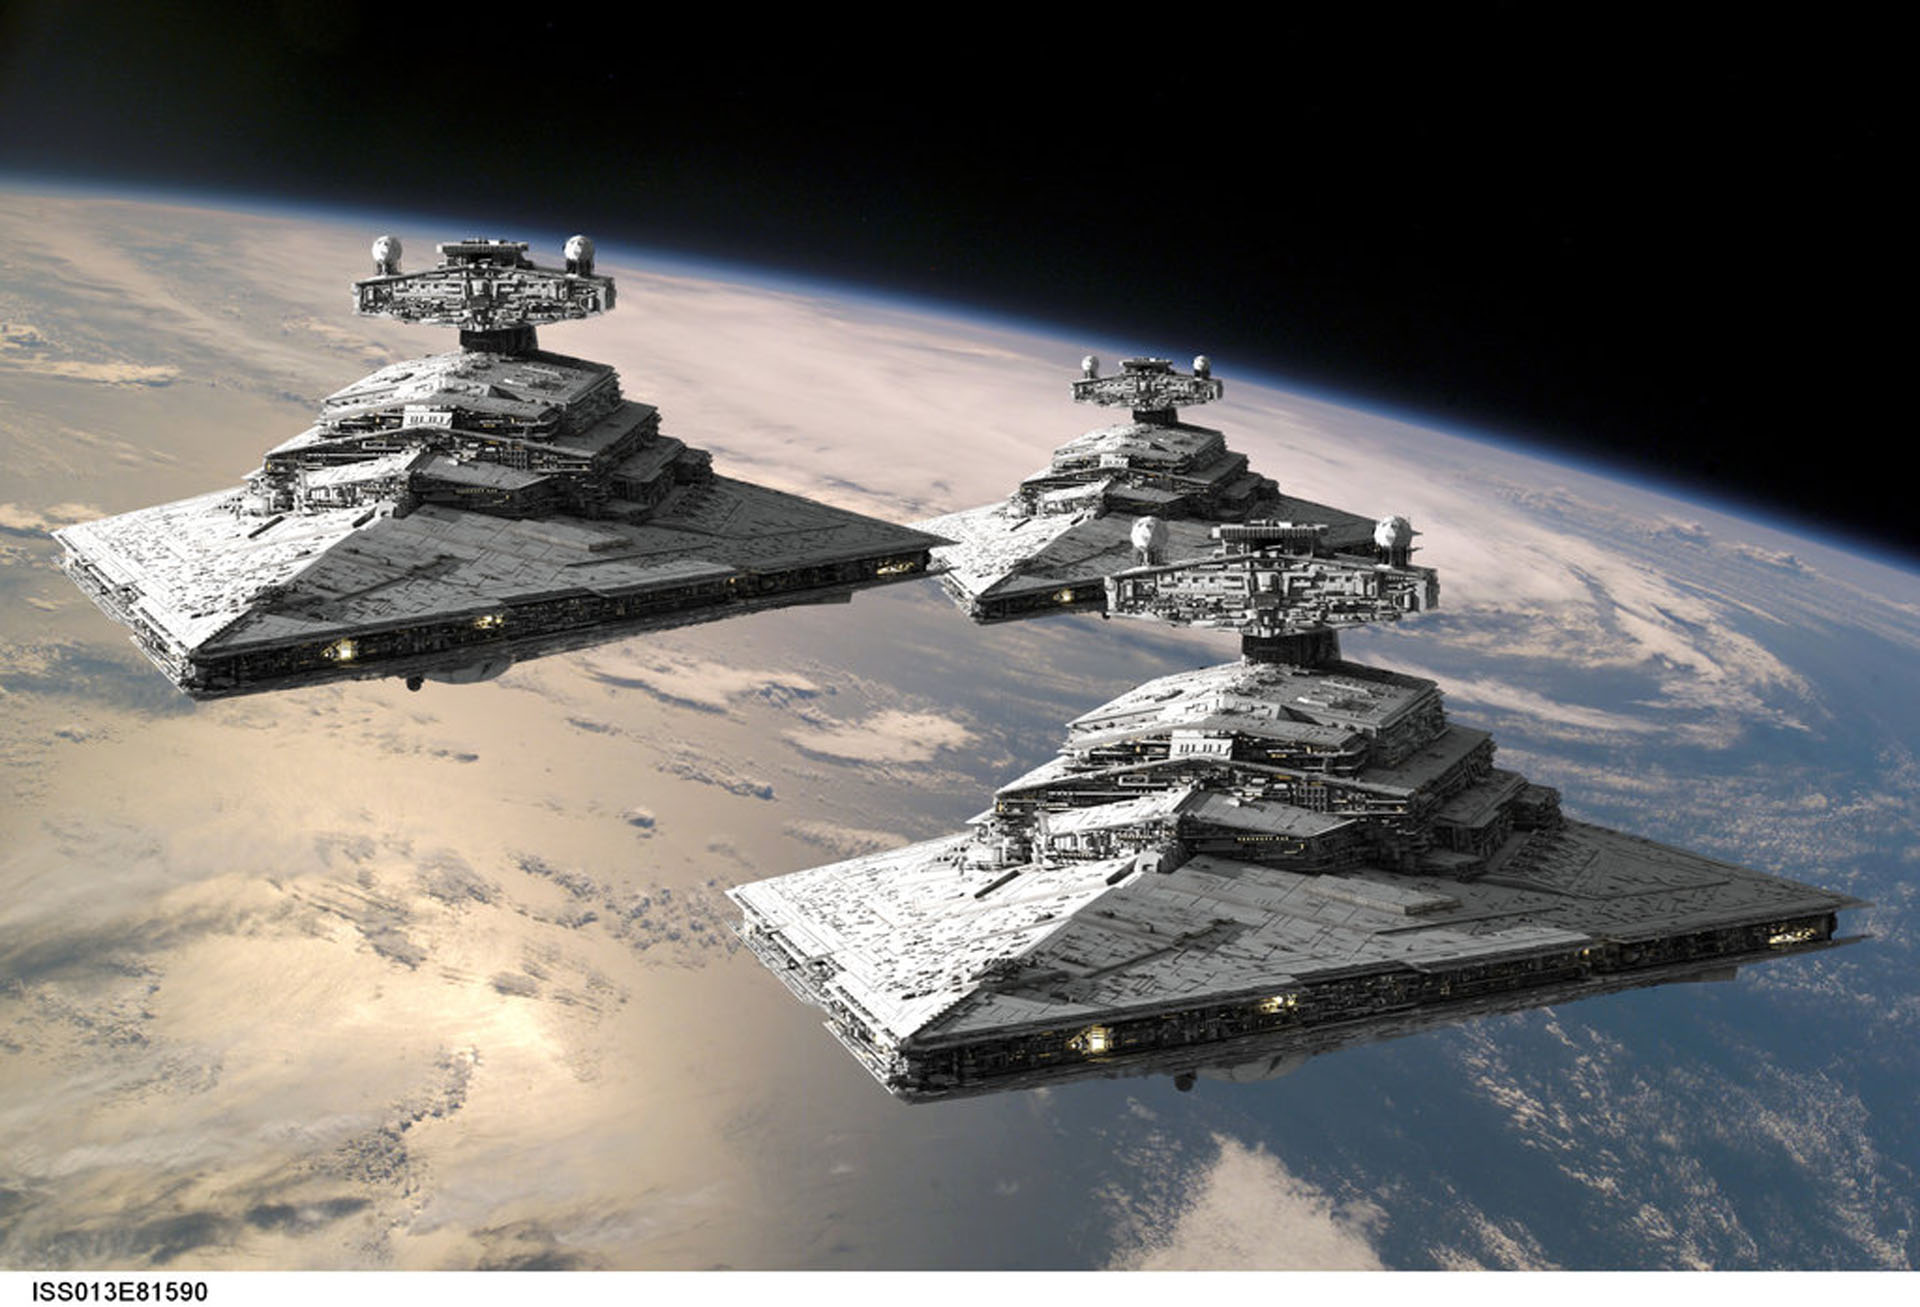 star destroyer, sci fi collection of HD images